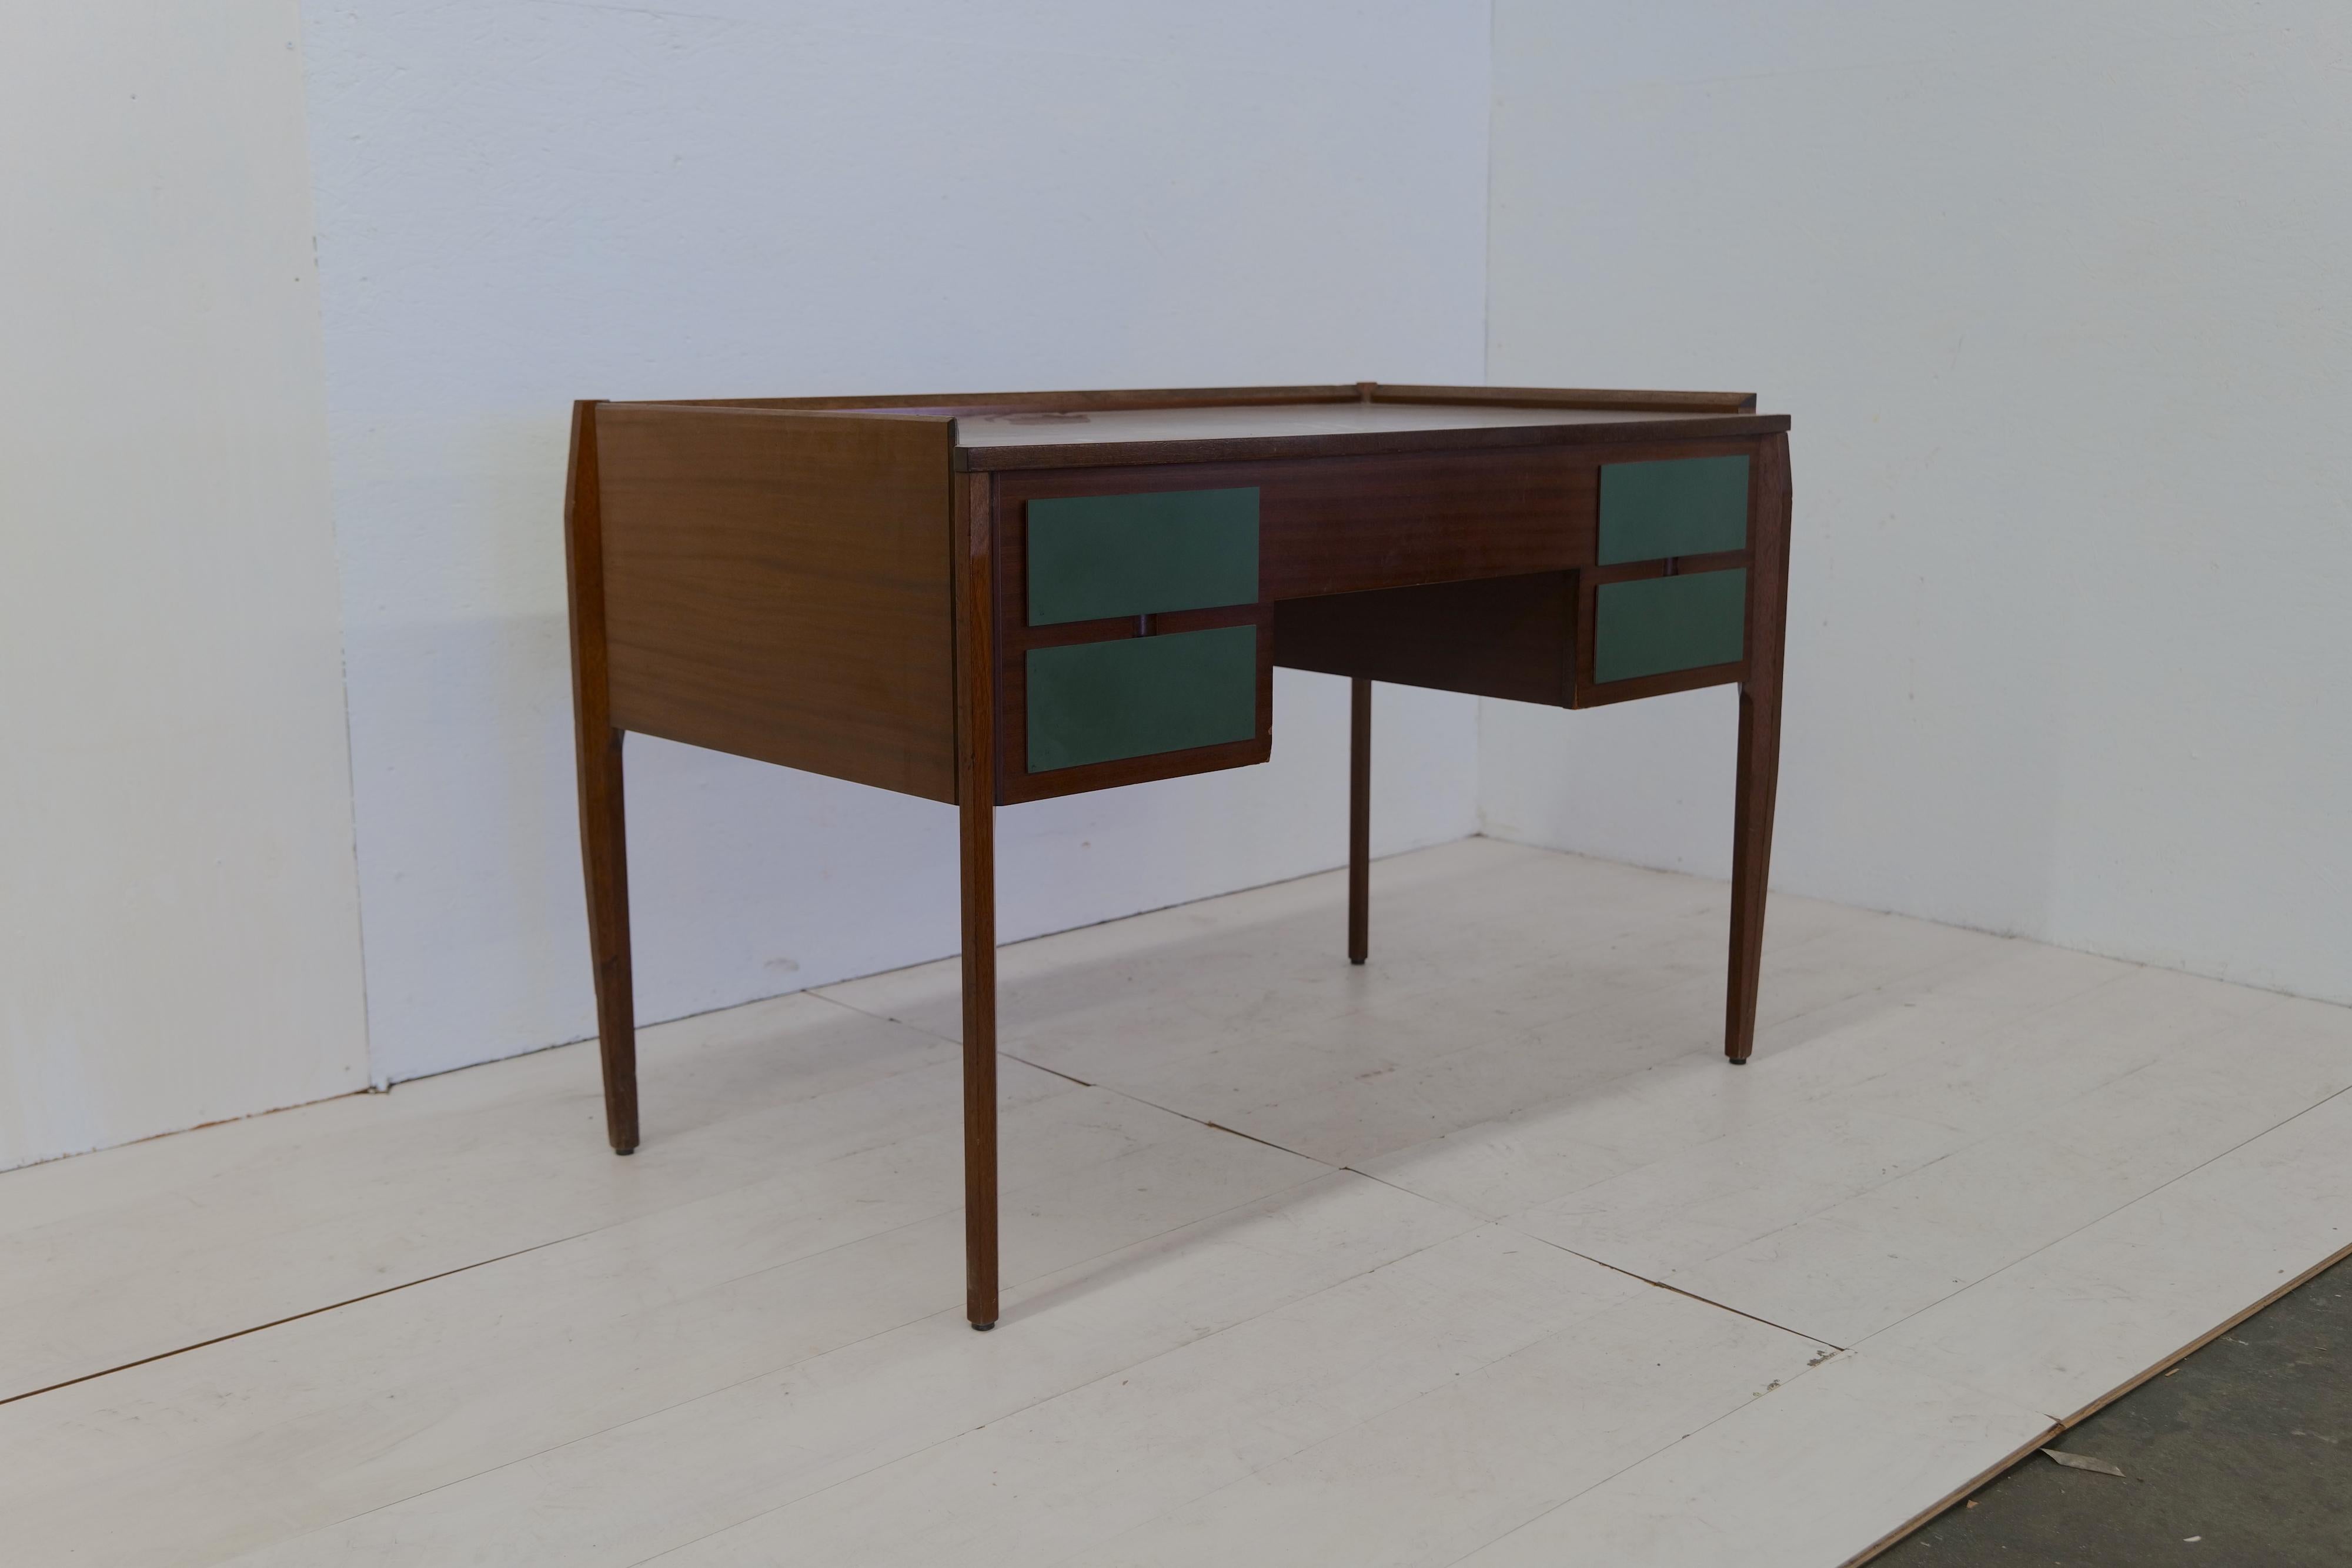 The Italian midcentury Vittorio D'assi desk from the 1960s is a stunning example of functional elegance. Designed by Vittorio D'assi, this desk showcases a harmonious blend of sleek lines and refined craftsmanship. Crafted with high-quality